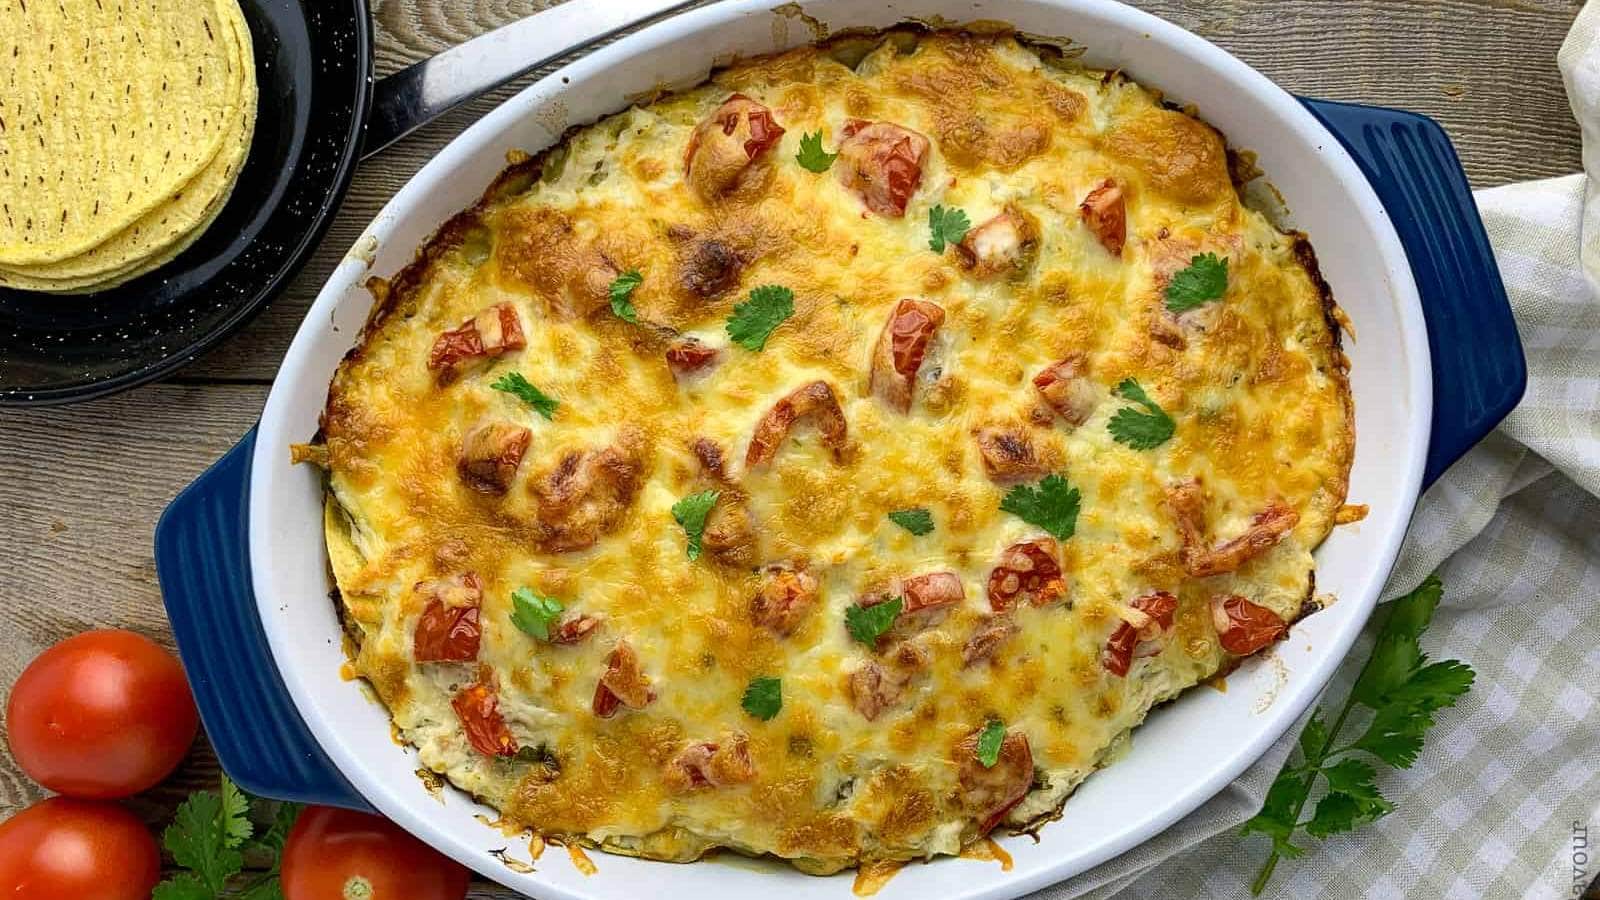 <p>Salsa Verde Chicken Tortilla Casserole is a creamy, cozy, comforting baked chicken dish bursting with Tex-Mex flavors! Layers of creamy, spicy chicken alternated with corn tortillas, fresh tomatoes, and lots of cheese make this a delicious chicken dish your whole family will love.</p><p><strong>Get the Recipe: <a href="https://www.flavourandsavour.com/salsa-verde-chicken-tortilla-casserole/" rel="noreferrer noopener">Salsa Verde Chicken Tortilla Casserole</a></strong></p>